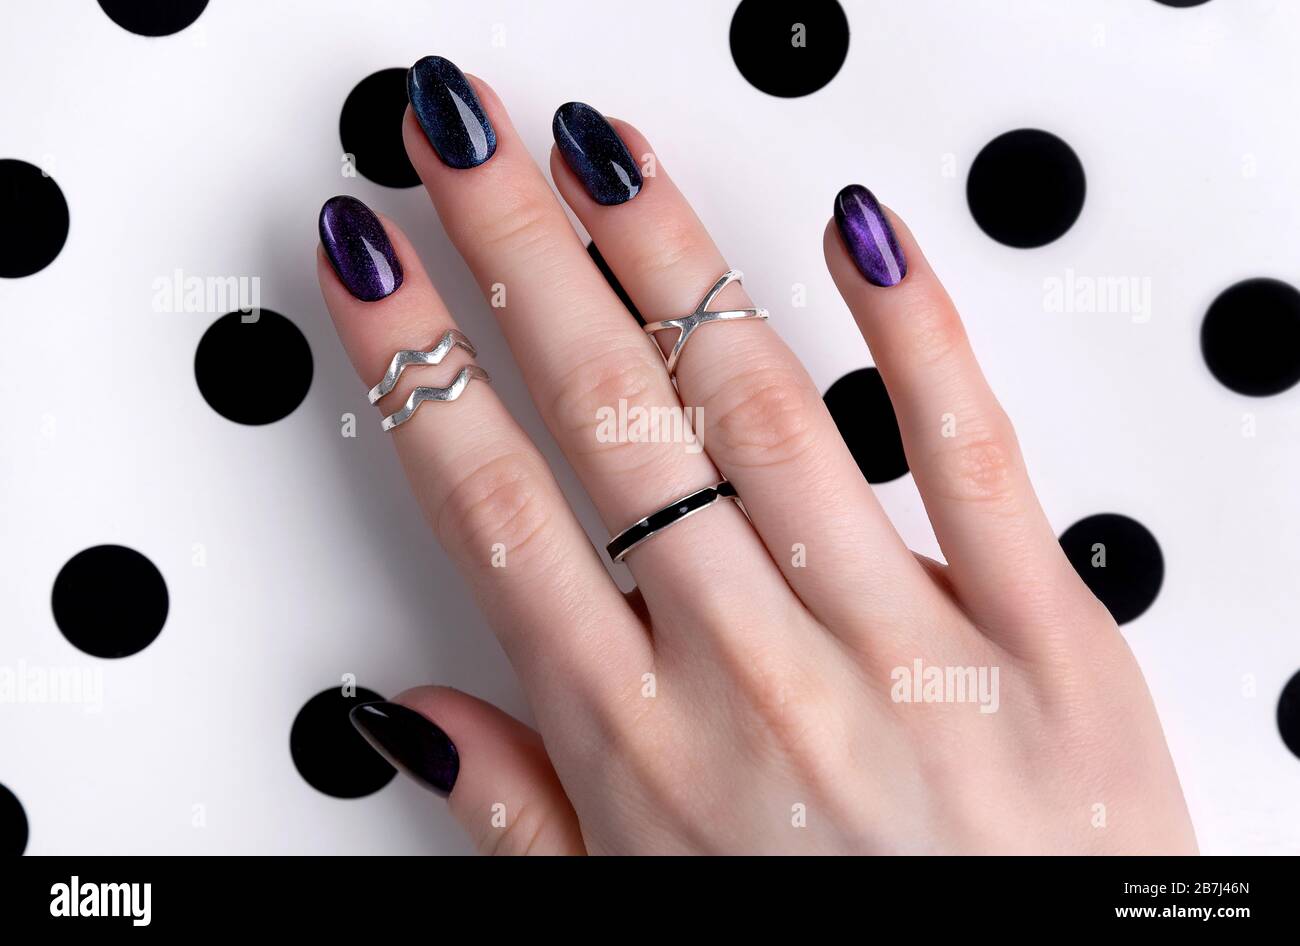 Beautiful groomed woman's hands with dark glitter polish design on nails Stock Photo